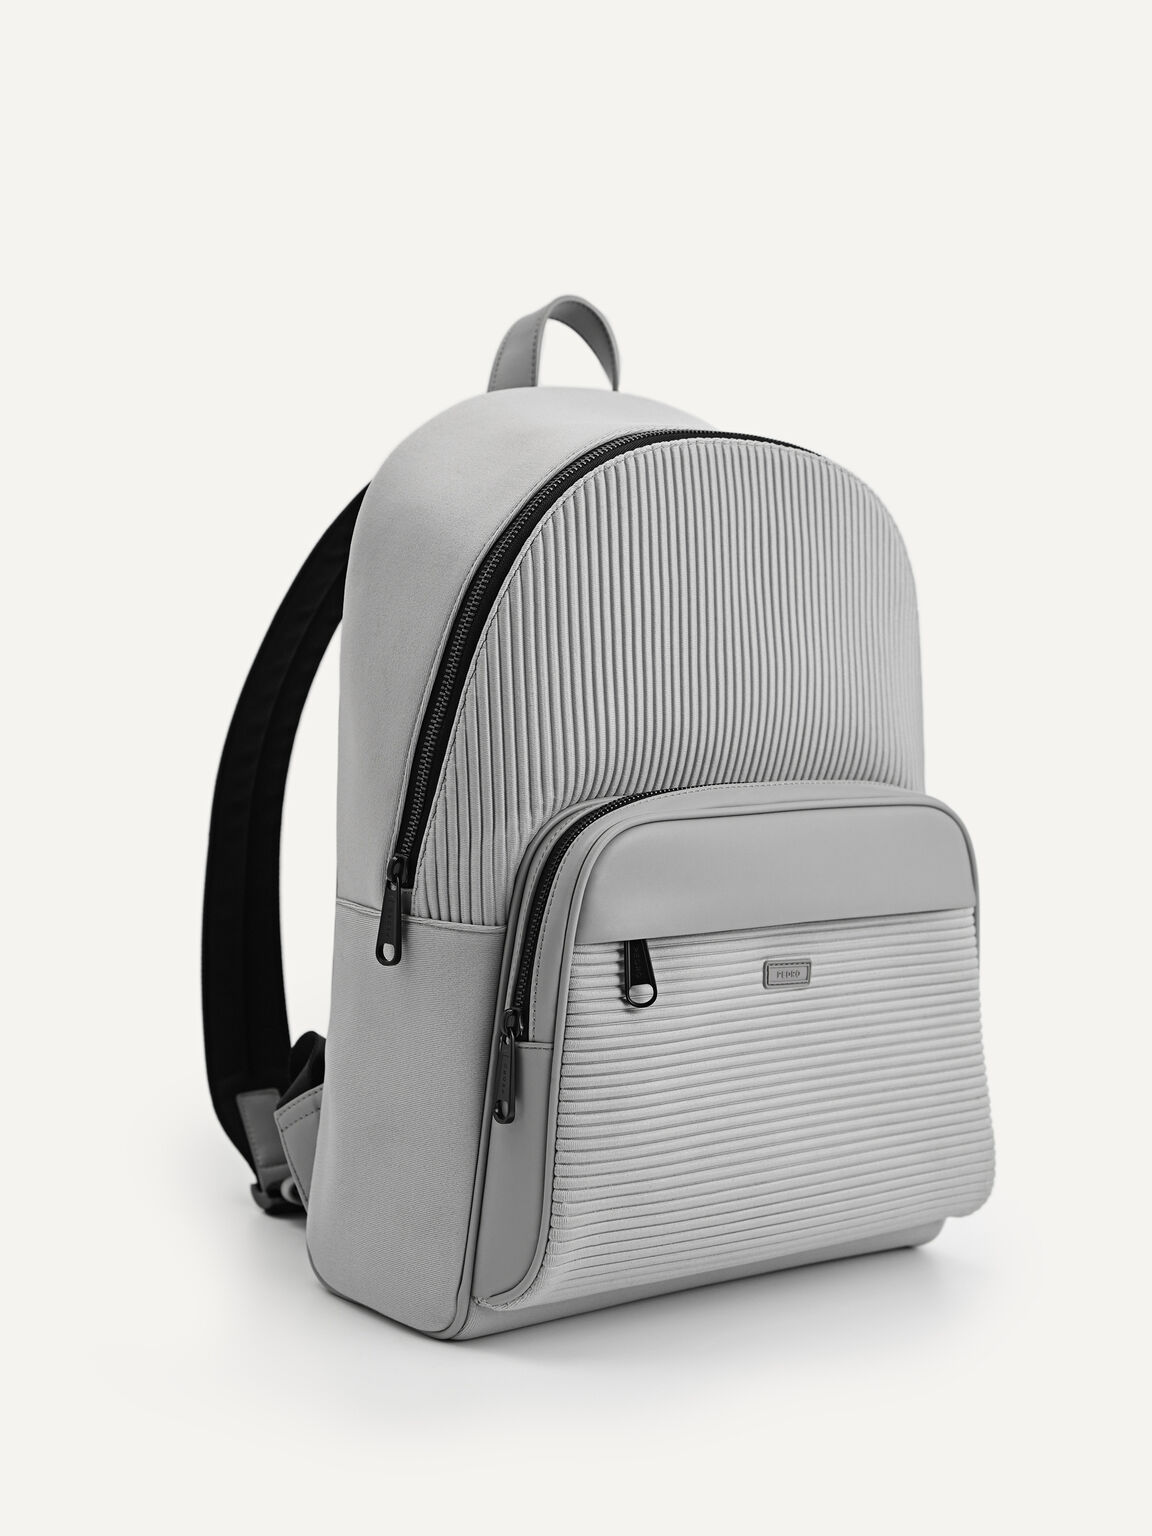 rePEDRO Pleated Backpack, Grey